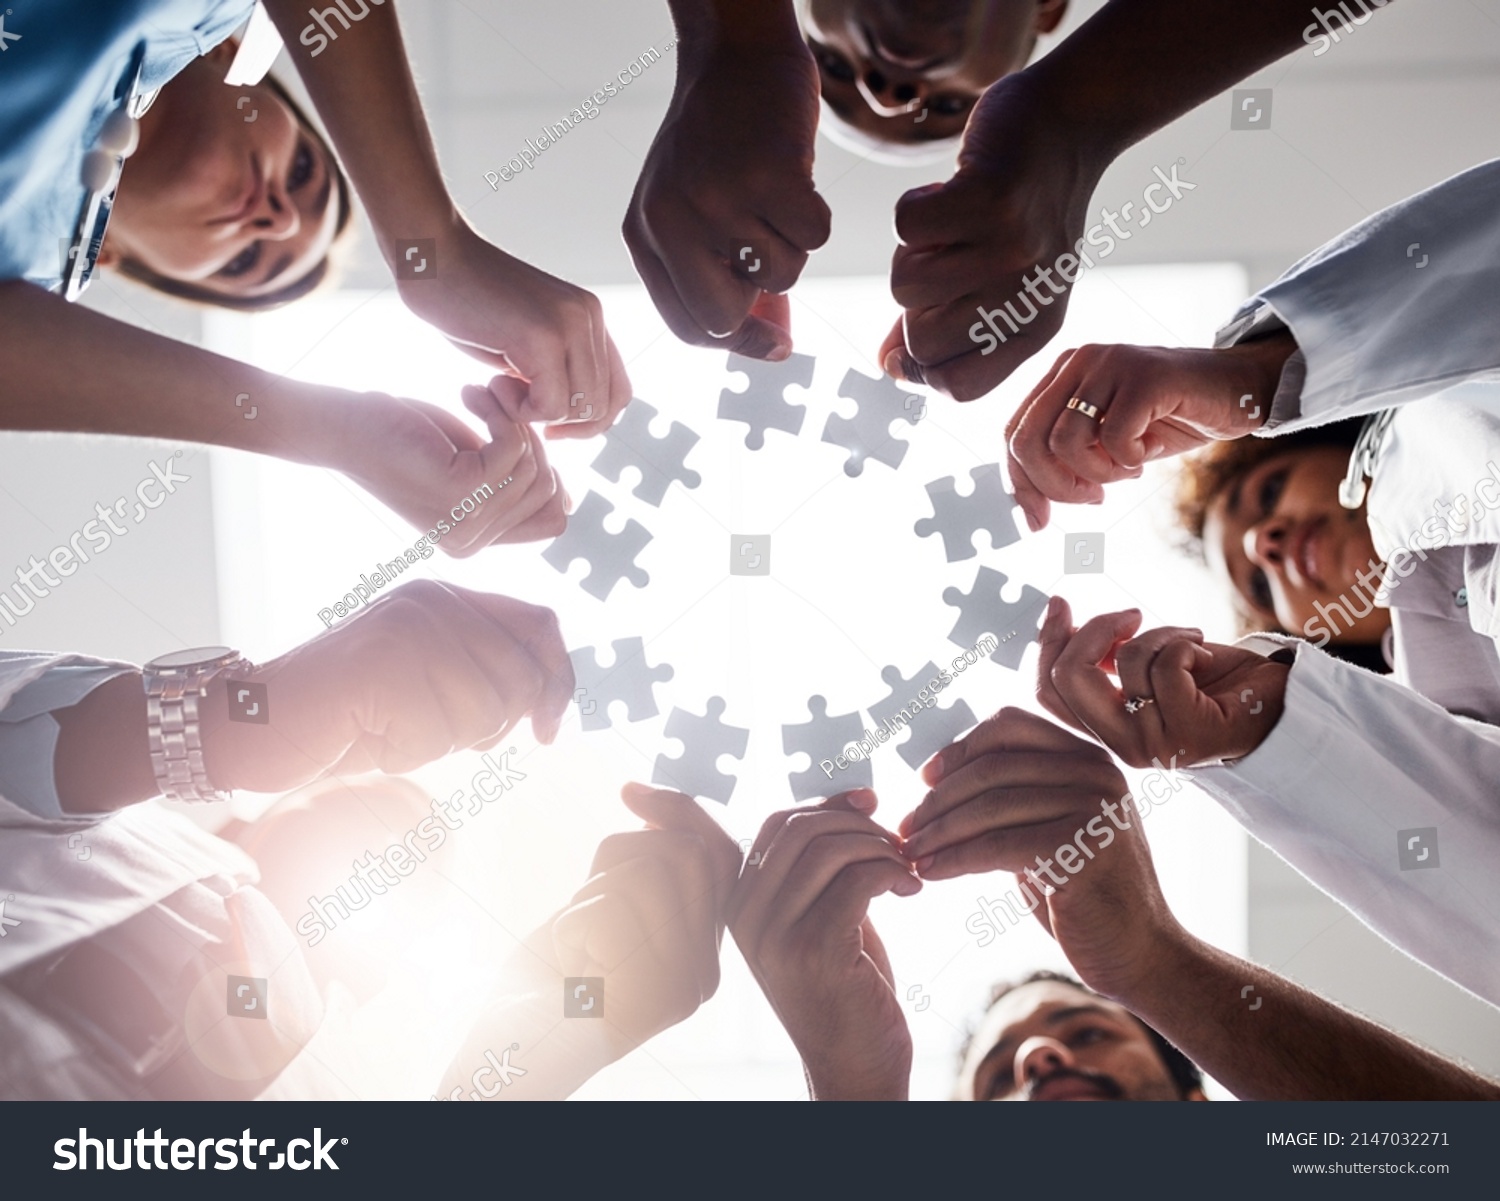 Everyone plays their part here. Low angle shot of a group of doctors forming a huddle while each holds a puzzle piece inside of a hospital. #2147032271